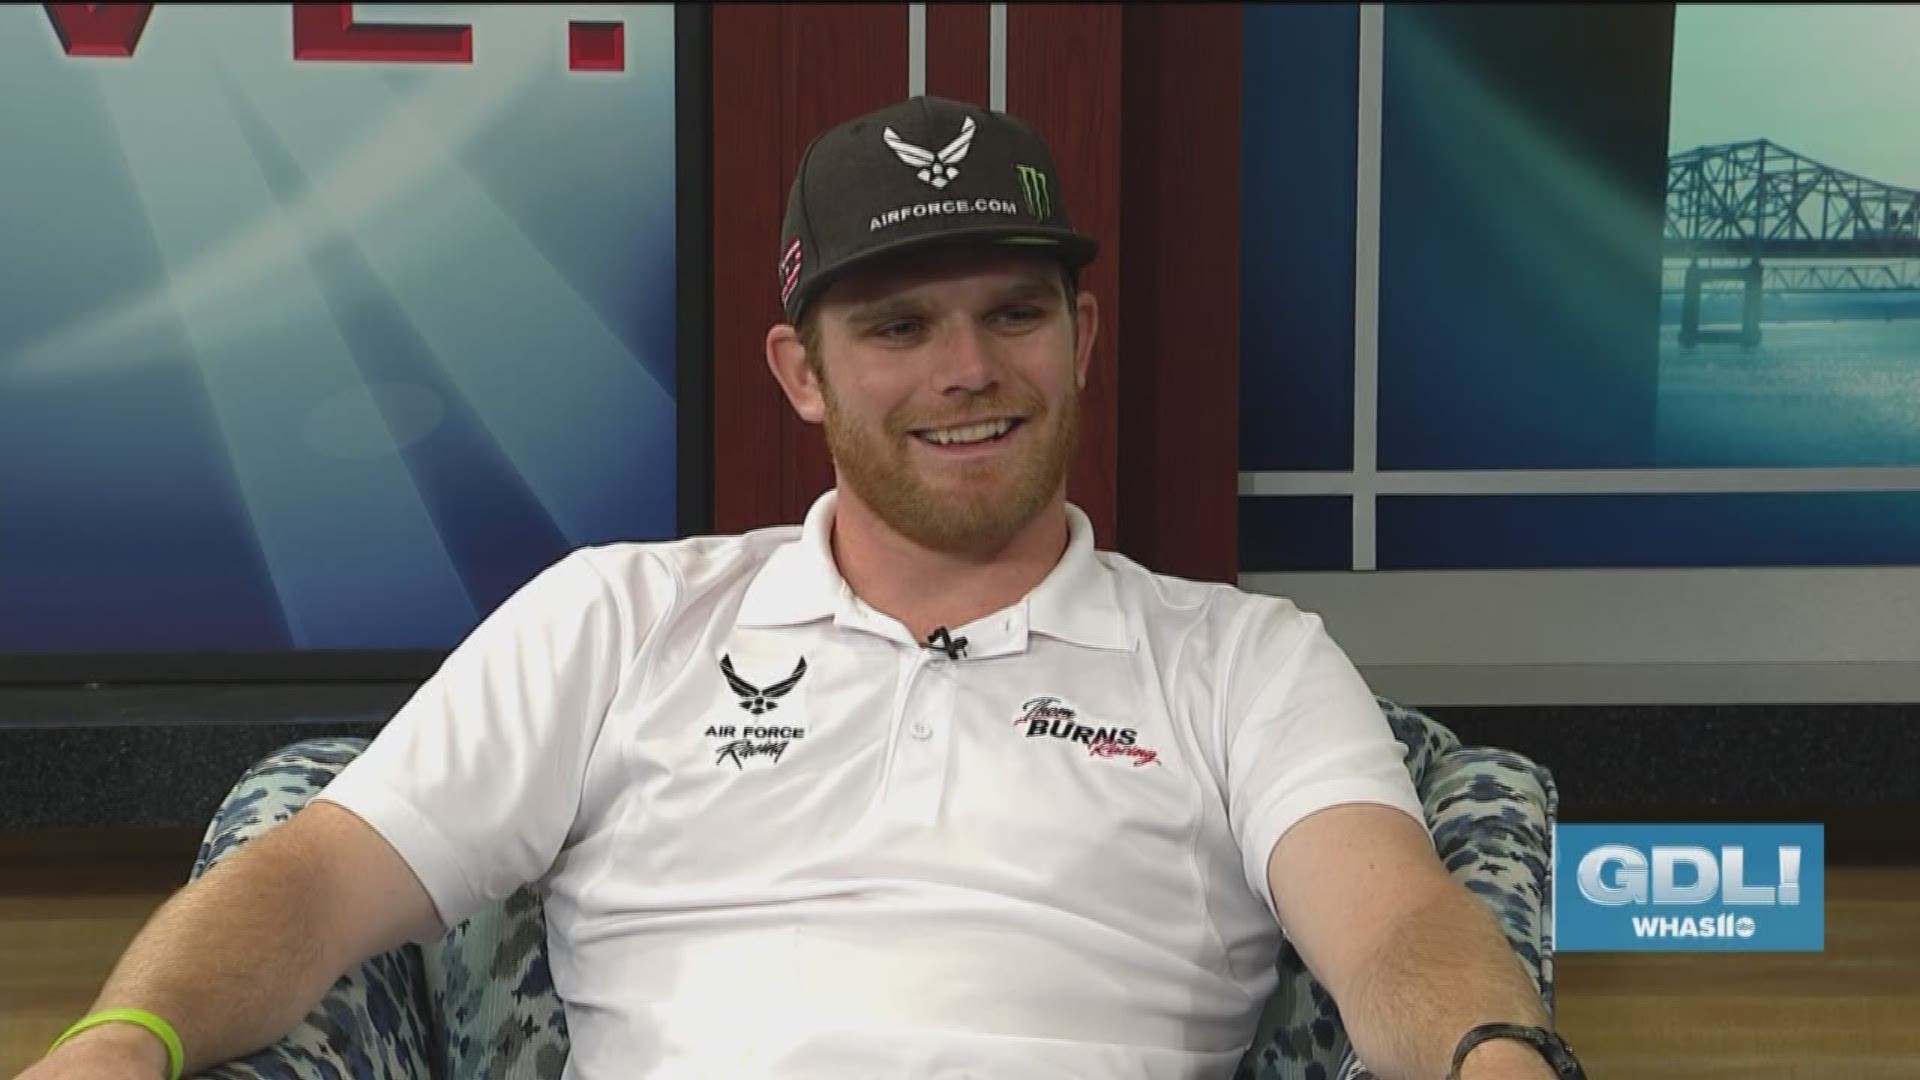 Indianapolis native, race car driver & TV celebrity Conor Daly will compete in The Indianapolis 500 this Sunday, May 27, 2018.